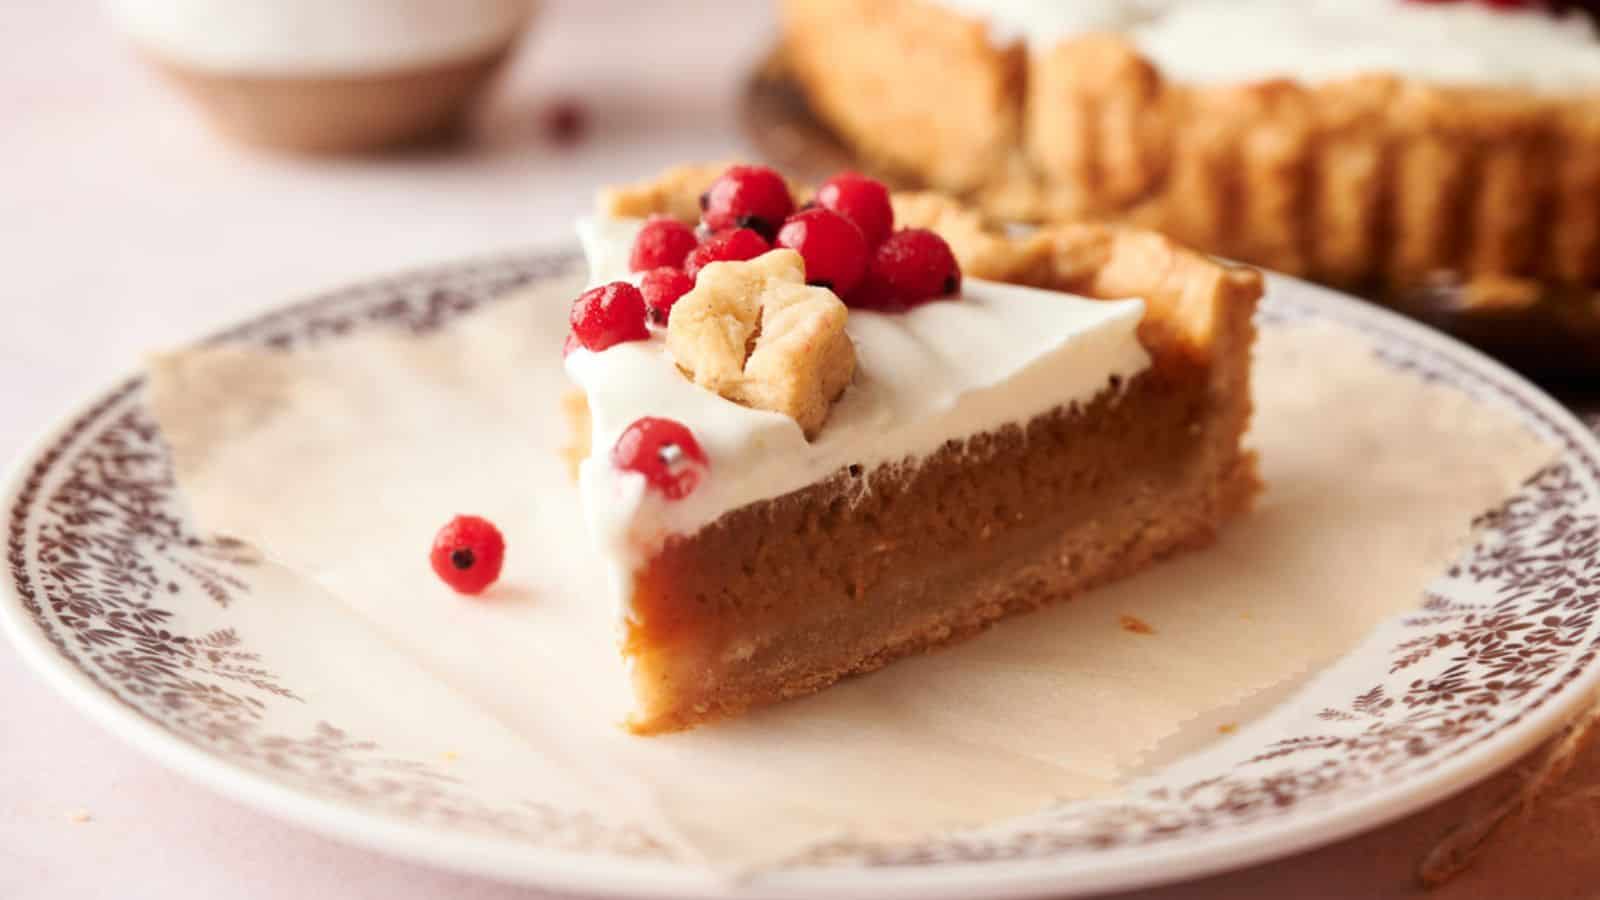 A slice of pumpkin pie on a plate with cranberries.